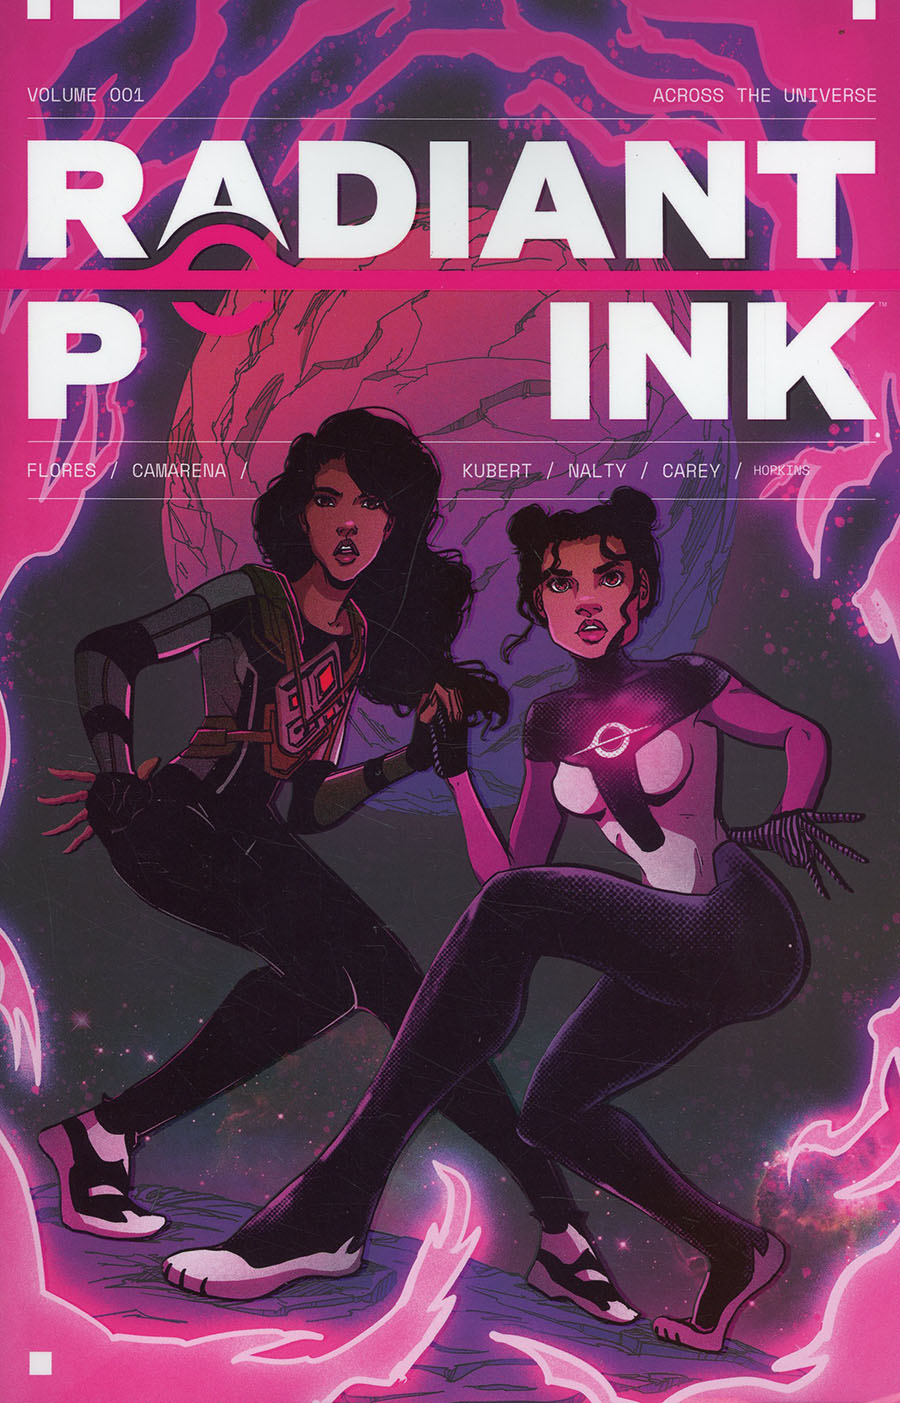 Radiant Pink Vol 1 Across The Universe TP